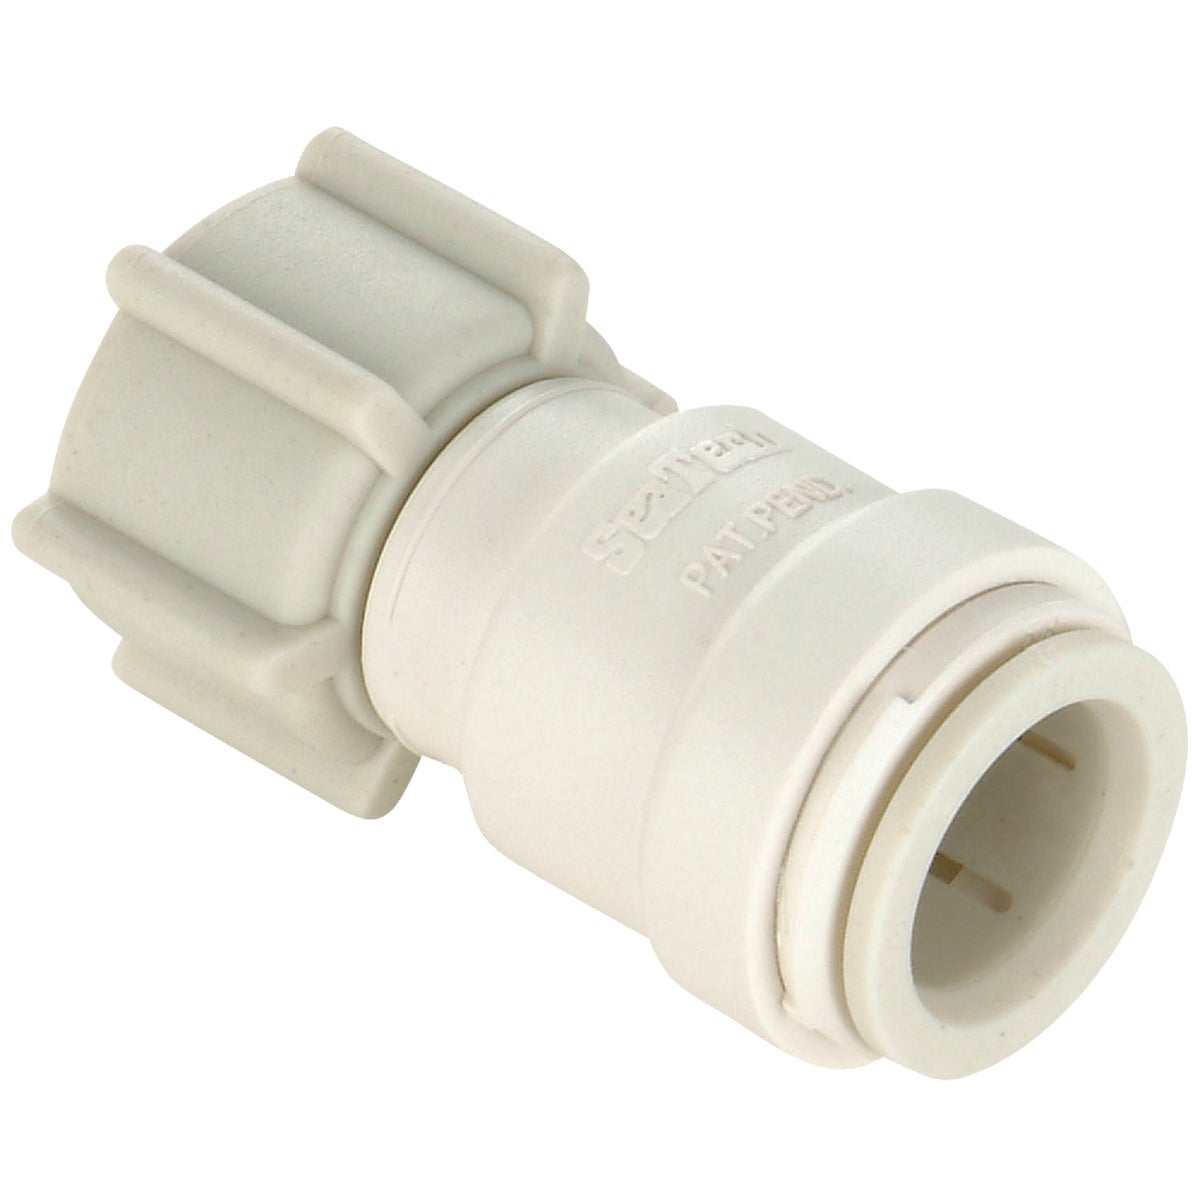 Watts Aqualock 1/2 In. CTS x 1/2 In. FPT Push-to-Connect Plastic Adapter